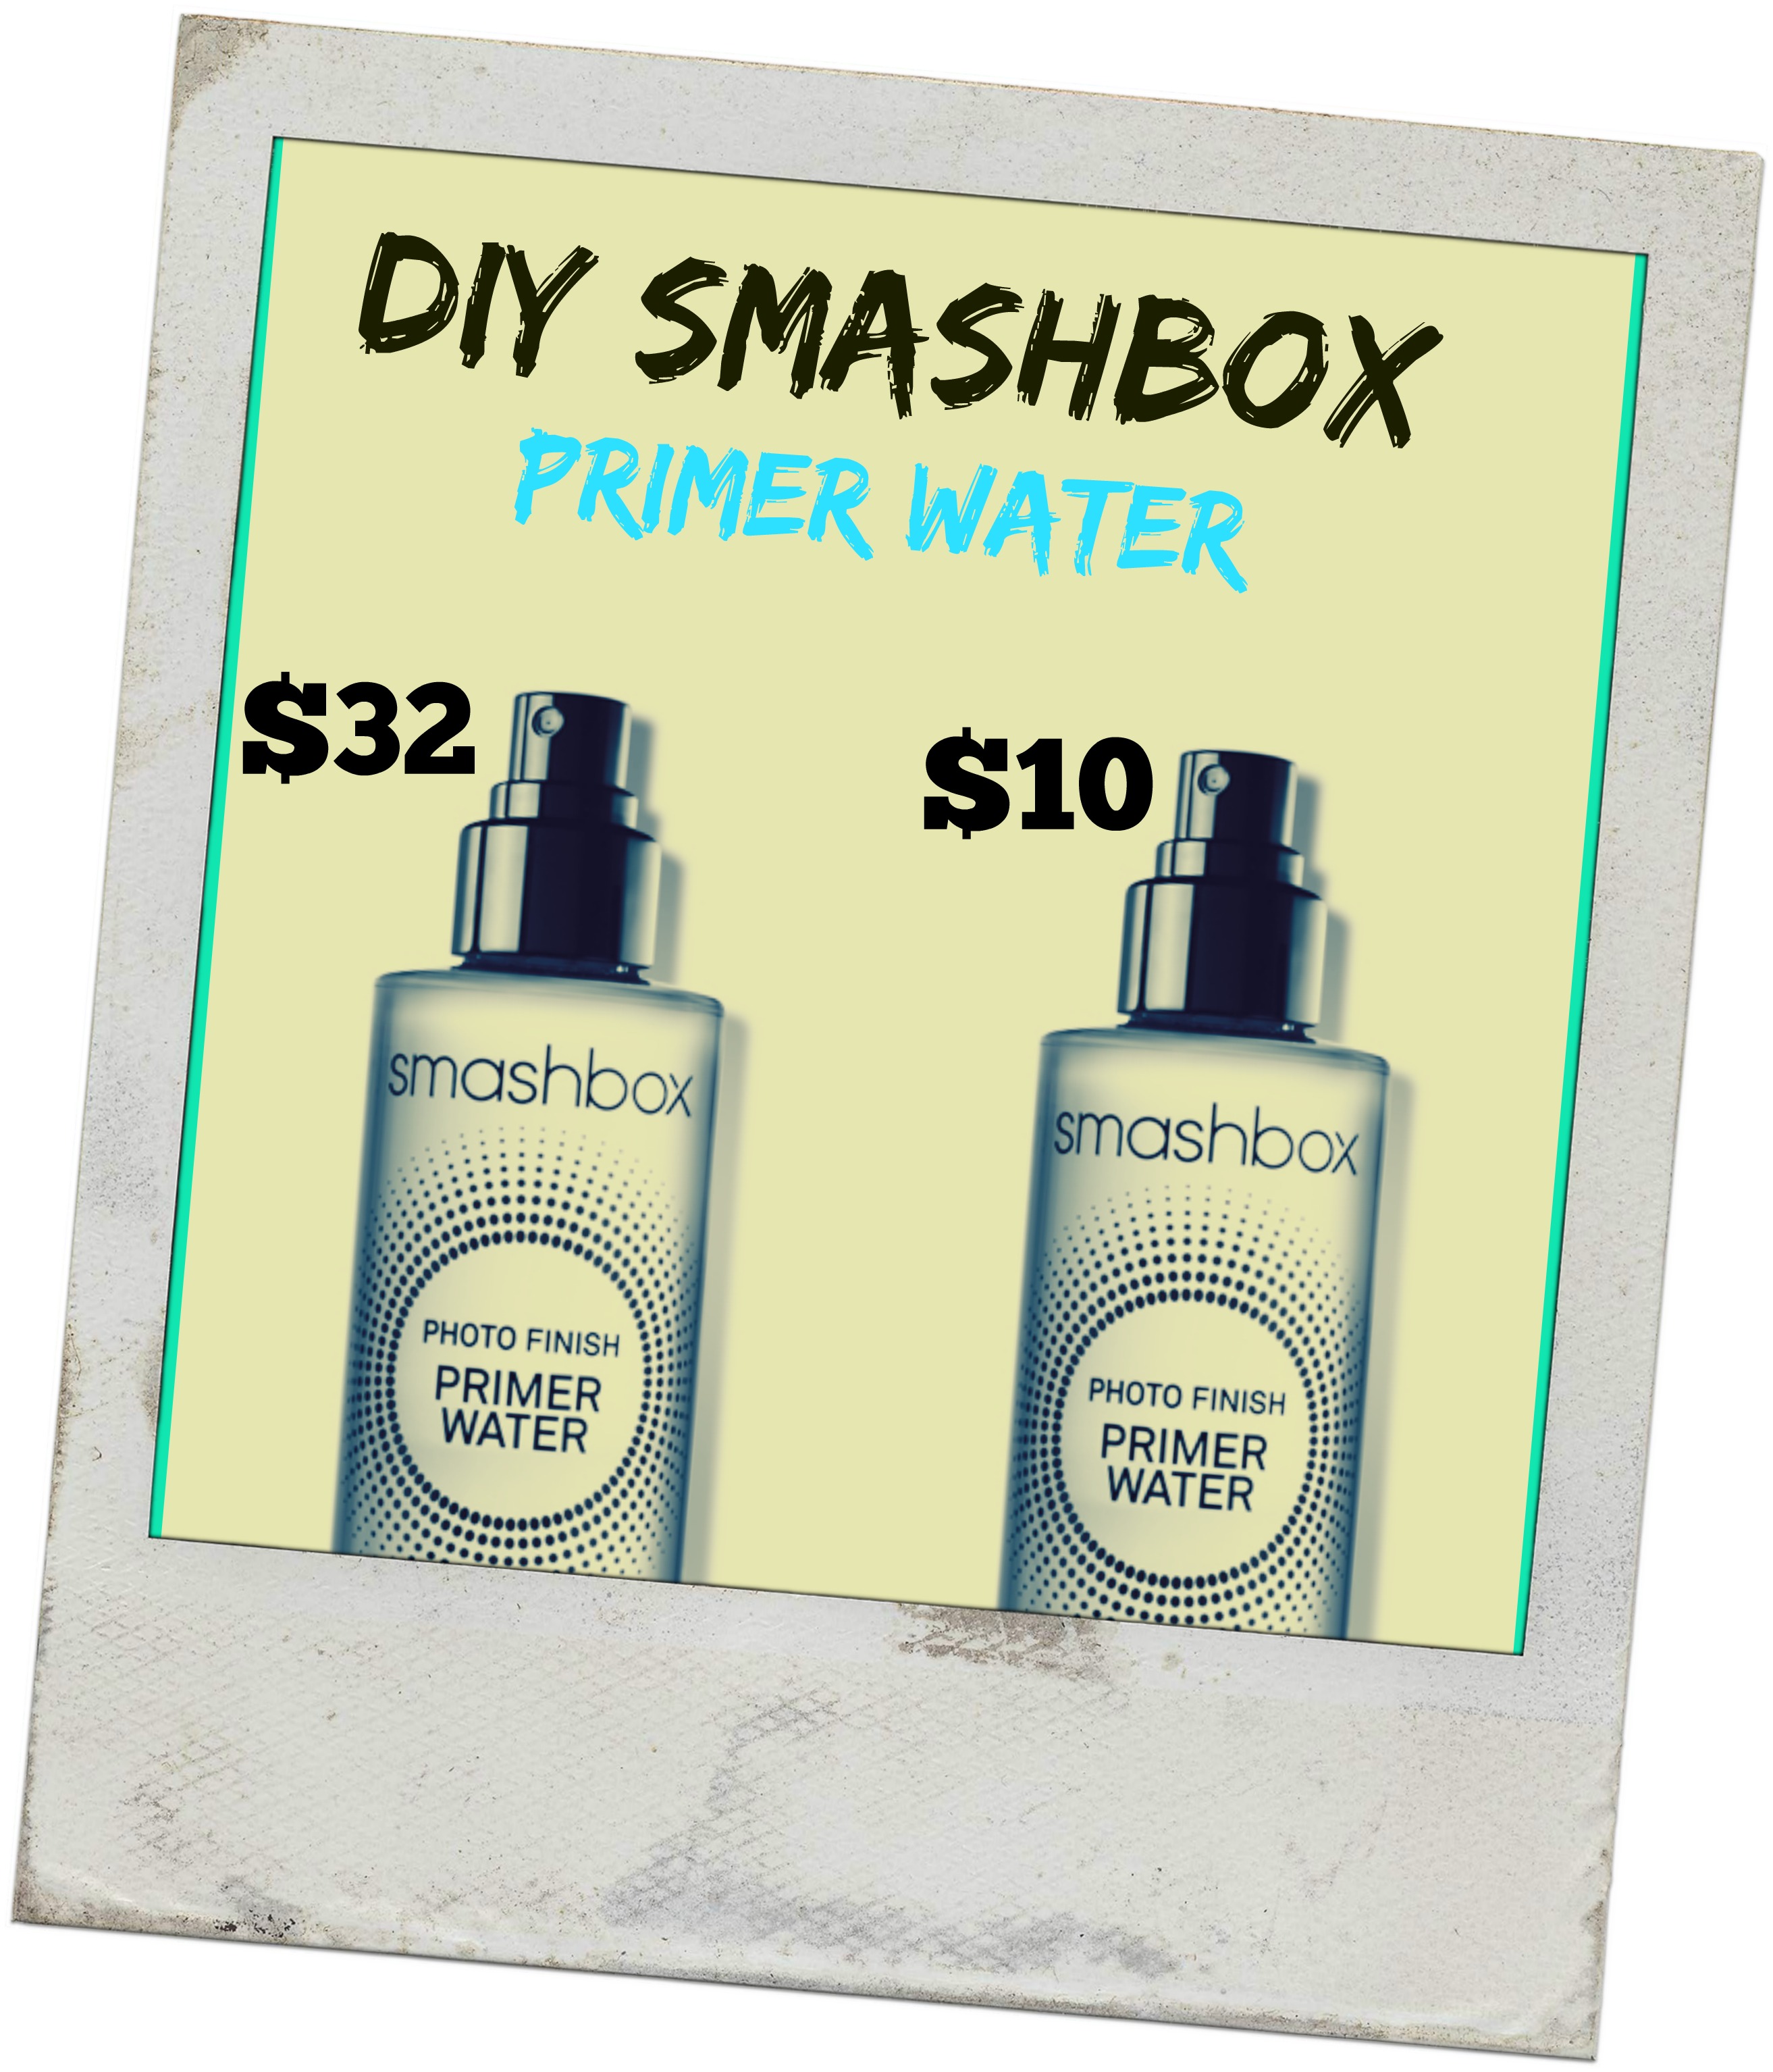 How to Make Your Own Smashbox Primer Water